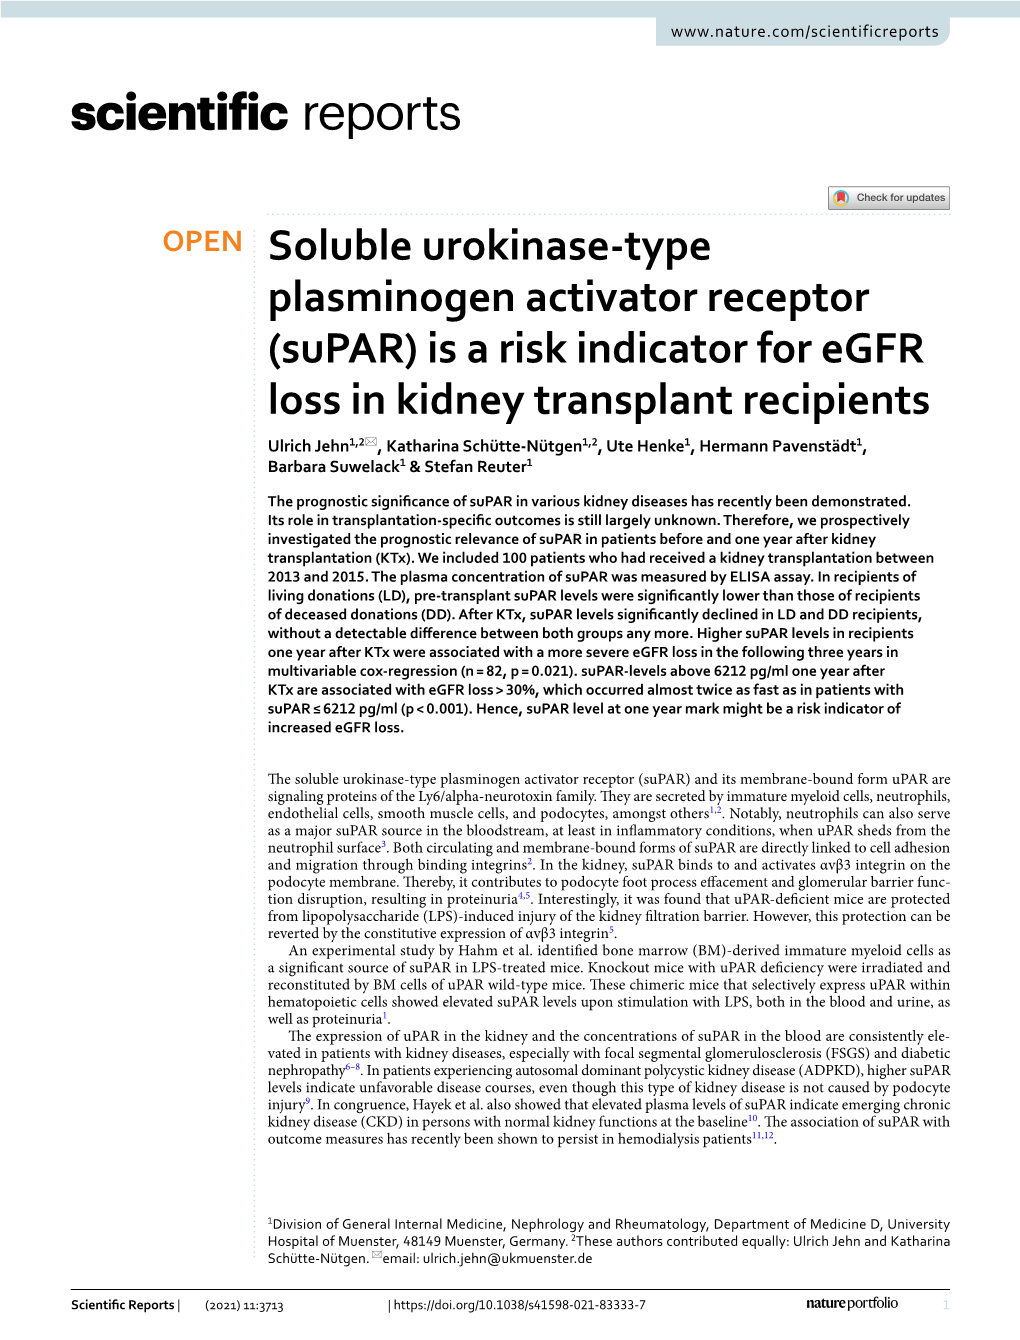 Soluble Urokinase-Type Plasminogen Activator Receptor (Supar) and Its Membrane-Bound Form Upar Are Signaling Proteins of the Ly6/Alpha-Neurotoxin Family